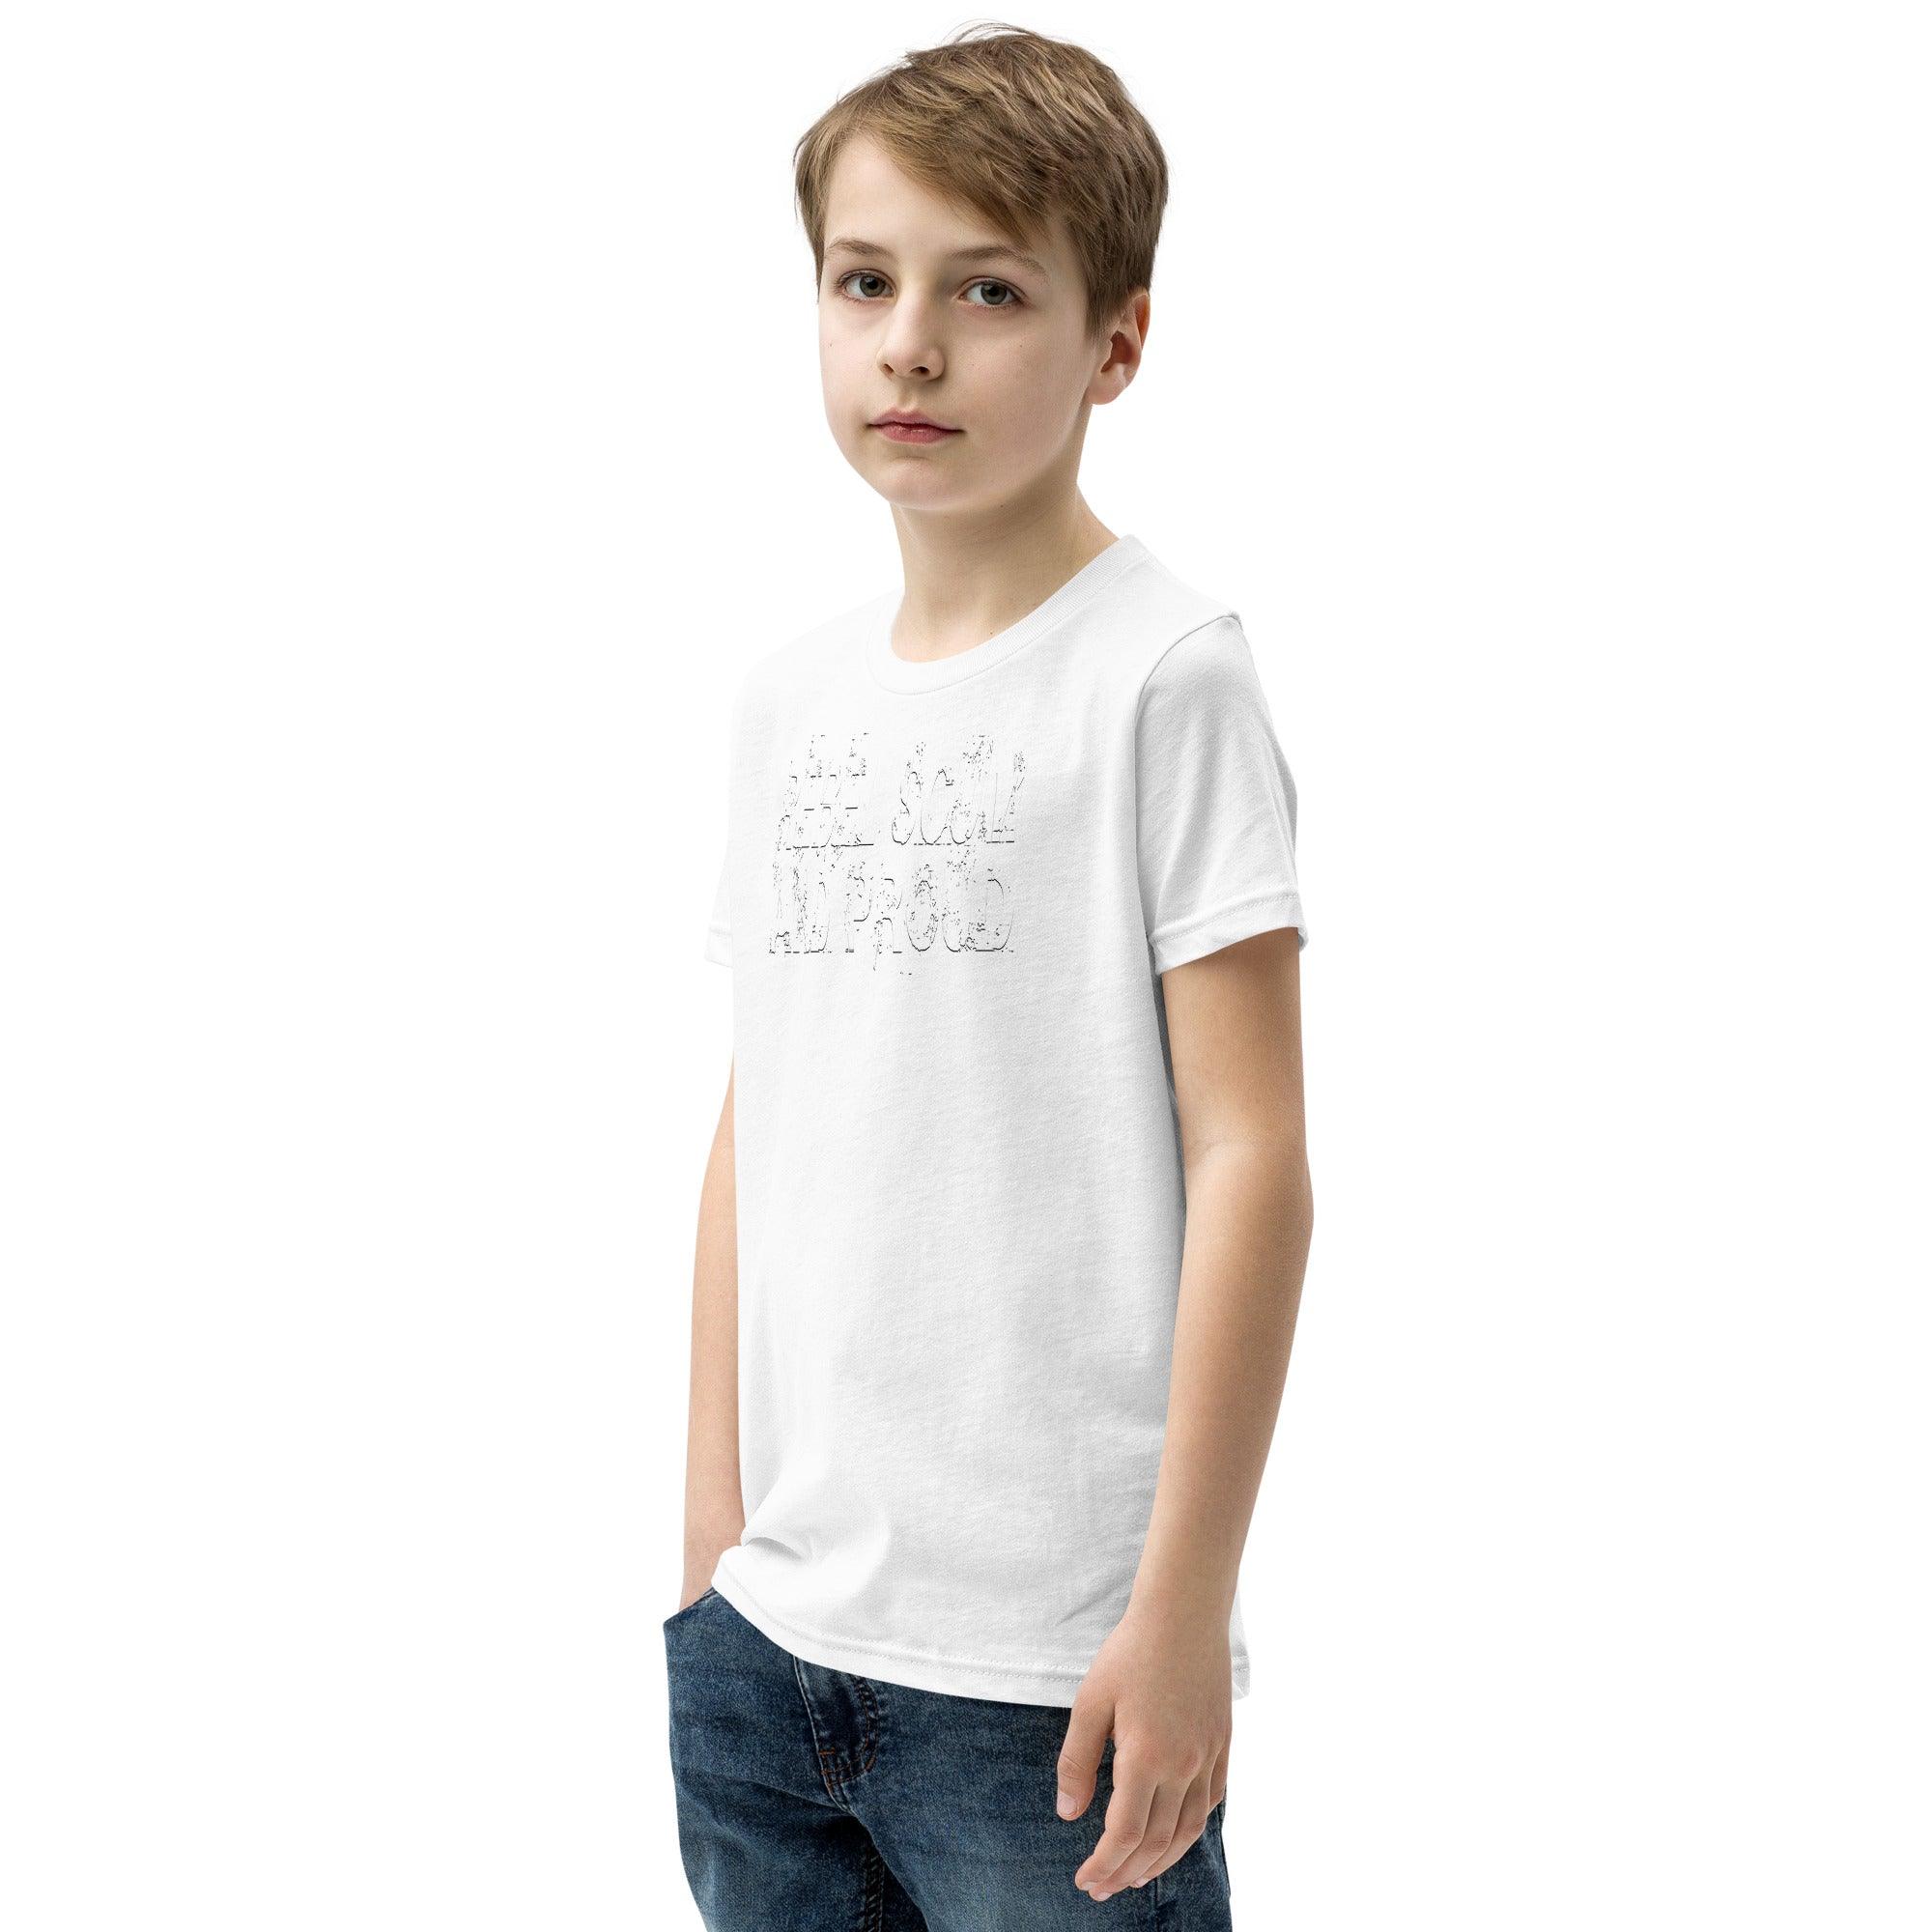 Rebel Scum and Proud Youth Short Sleeve T-Shirt VAWDesigns